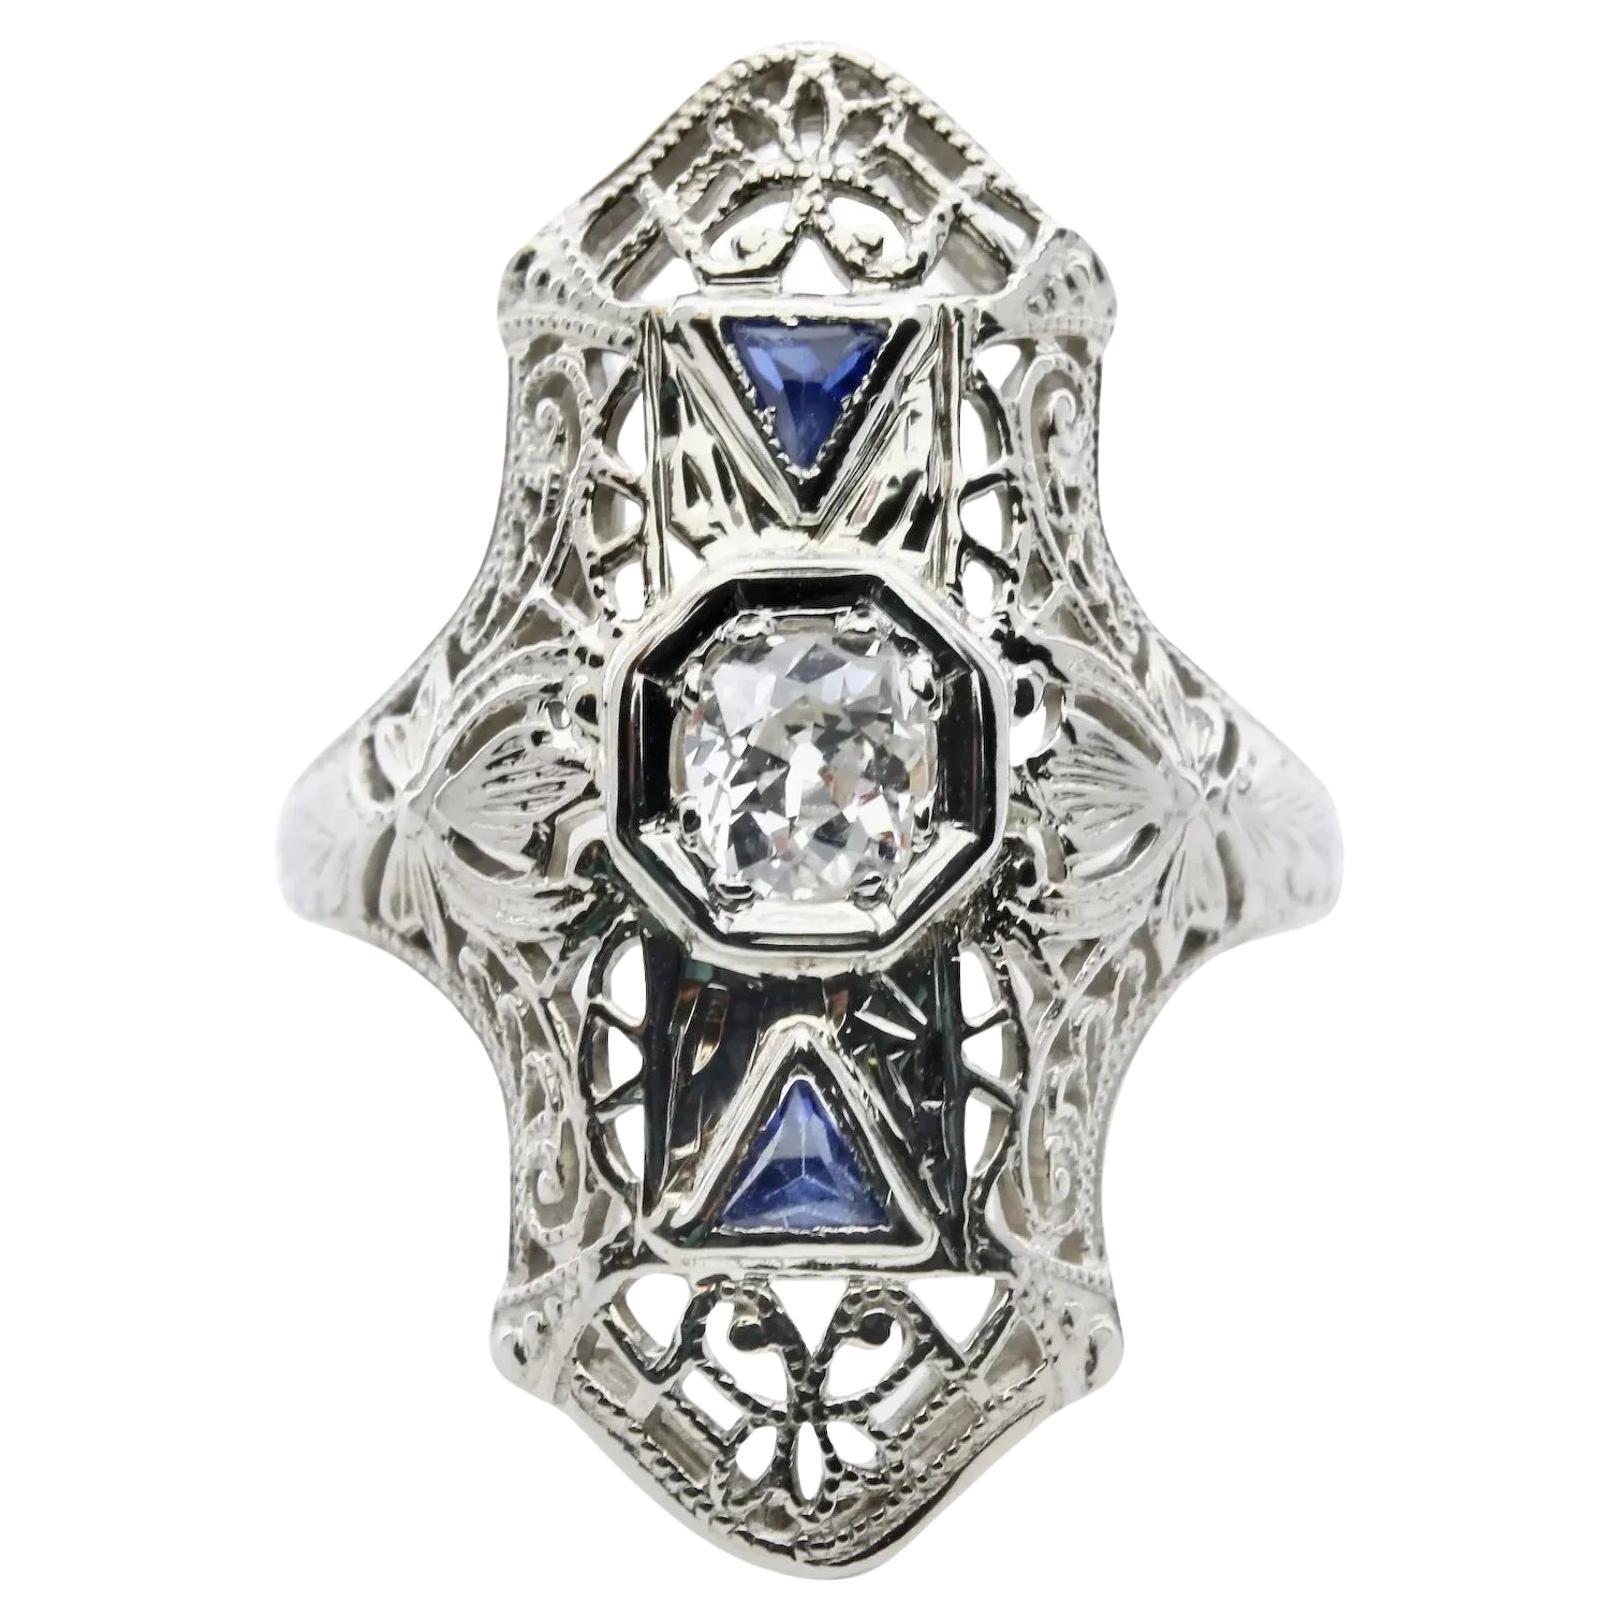 Art Deco Diamond & French Cut Sapphire Trilogy Cocktail Ring in 18K White Gold